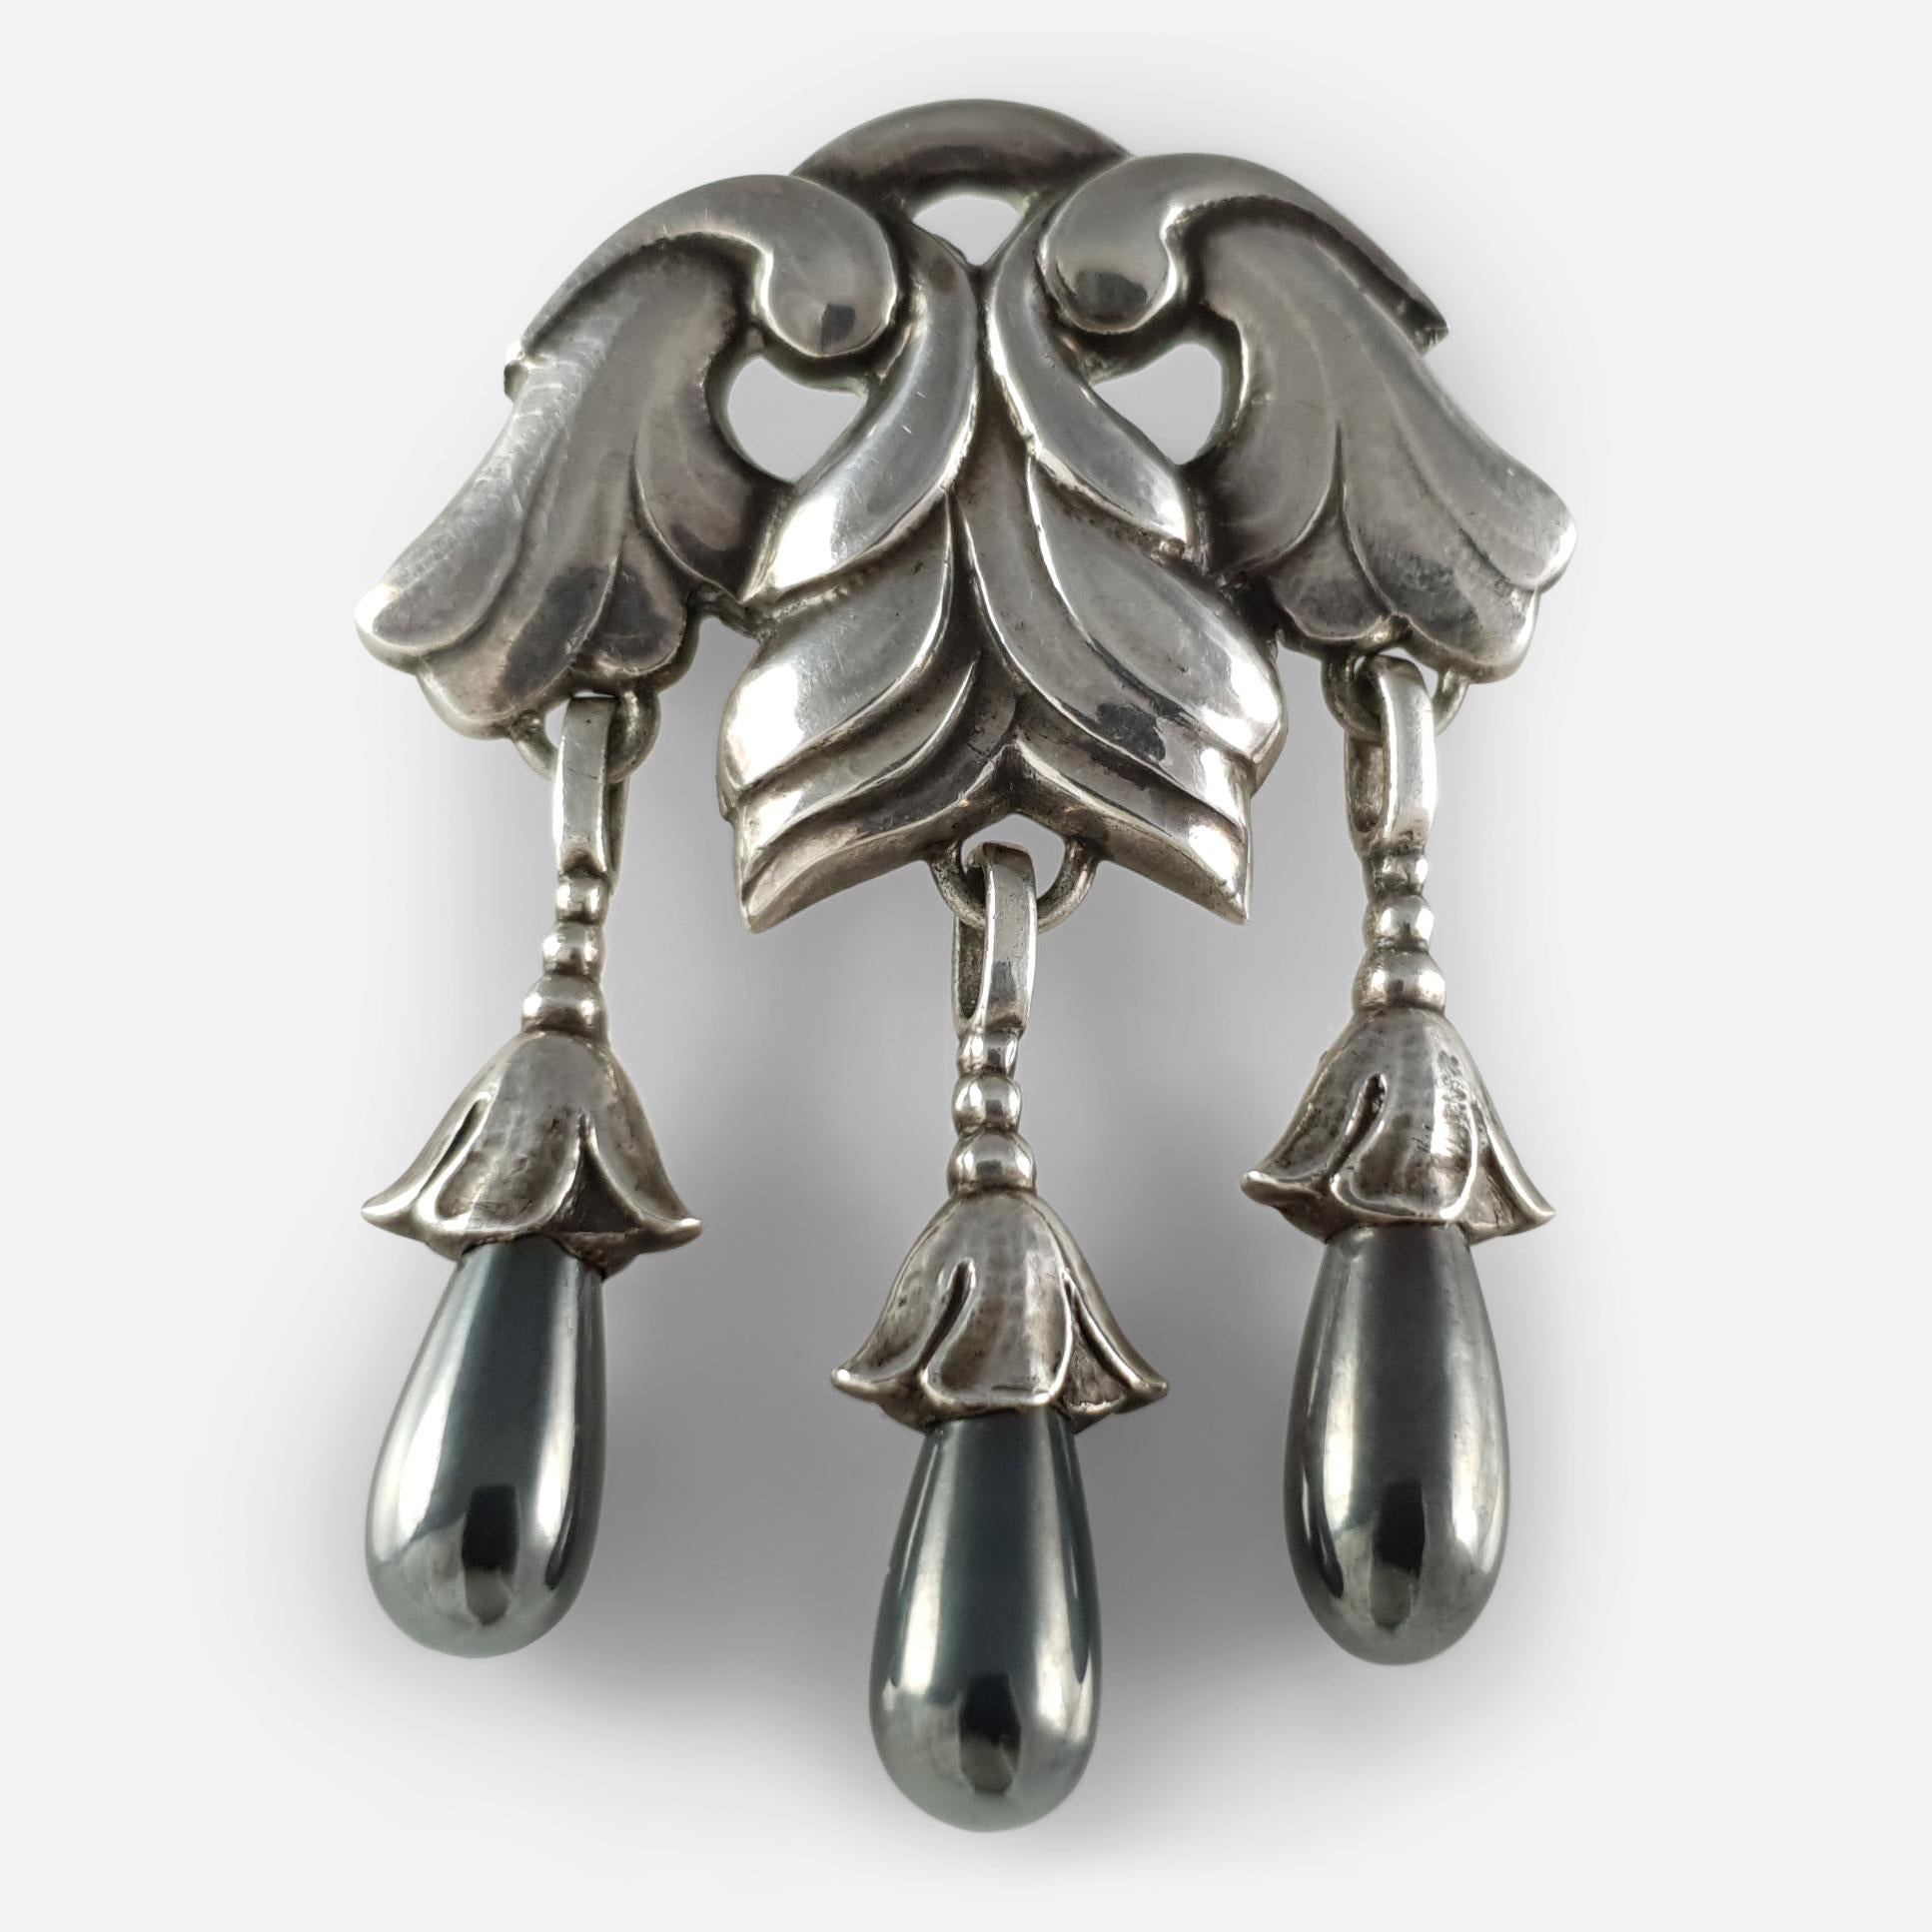 A Georg Jensen silver and hematite brooch #132, circa 1915-1930.  The silver foliate upper section suspends three polished hematite drops. 

The brooch is stamped with the GI makers marking inside a circle of beads used from 1915-1930, 830s mark